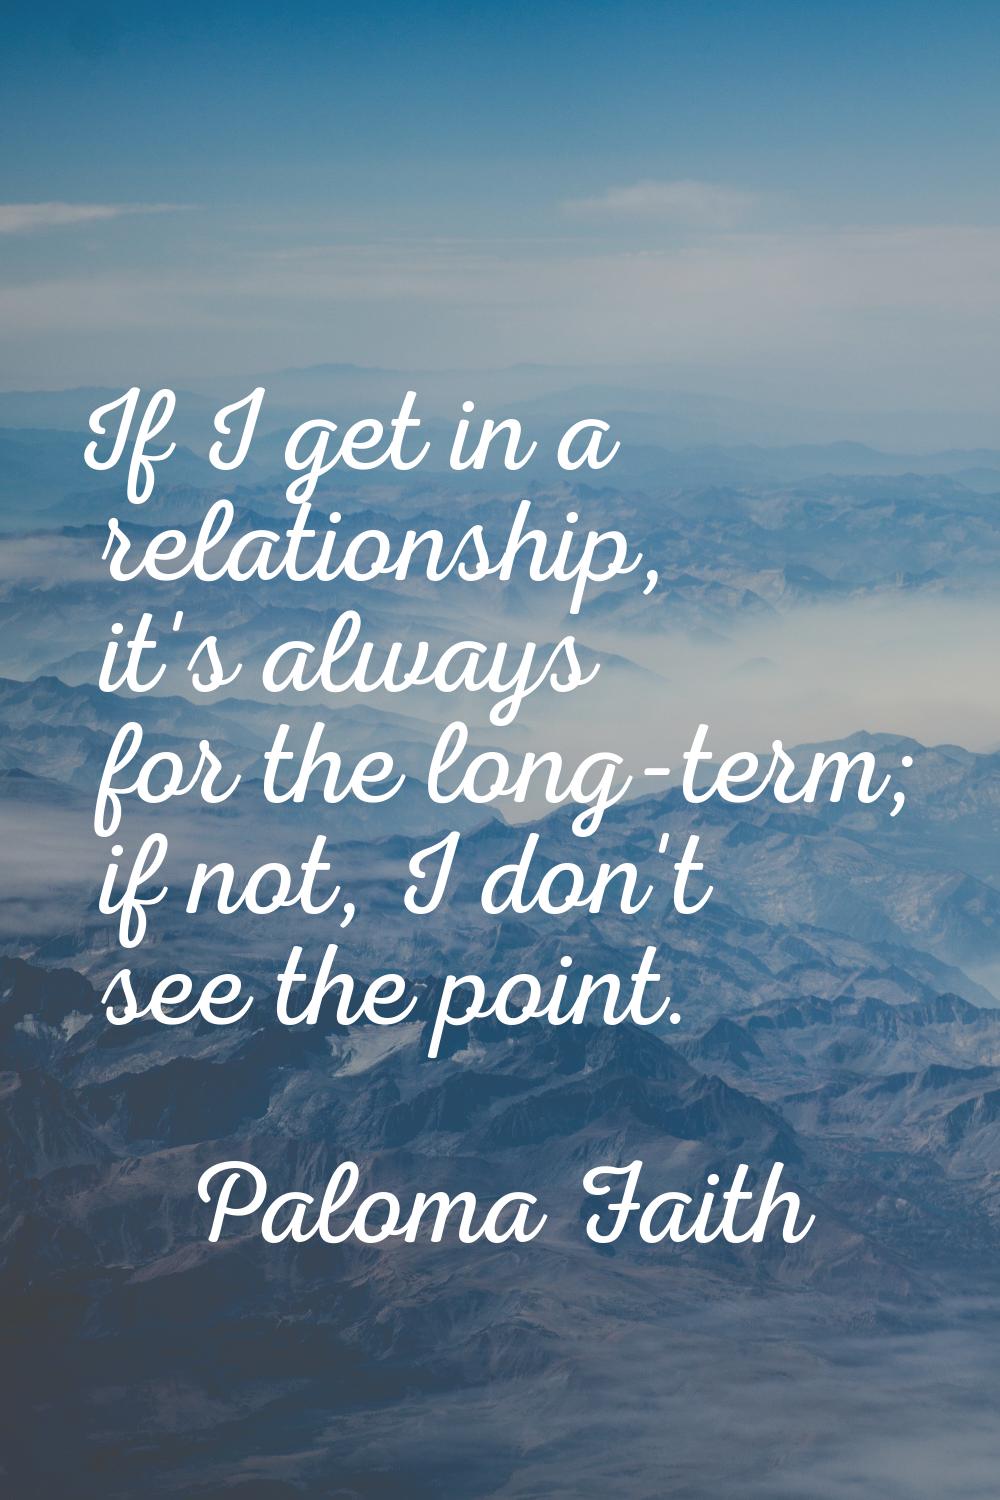 If I get in a relationship, it's always for the long-term; if not, I don't see the point.